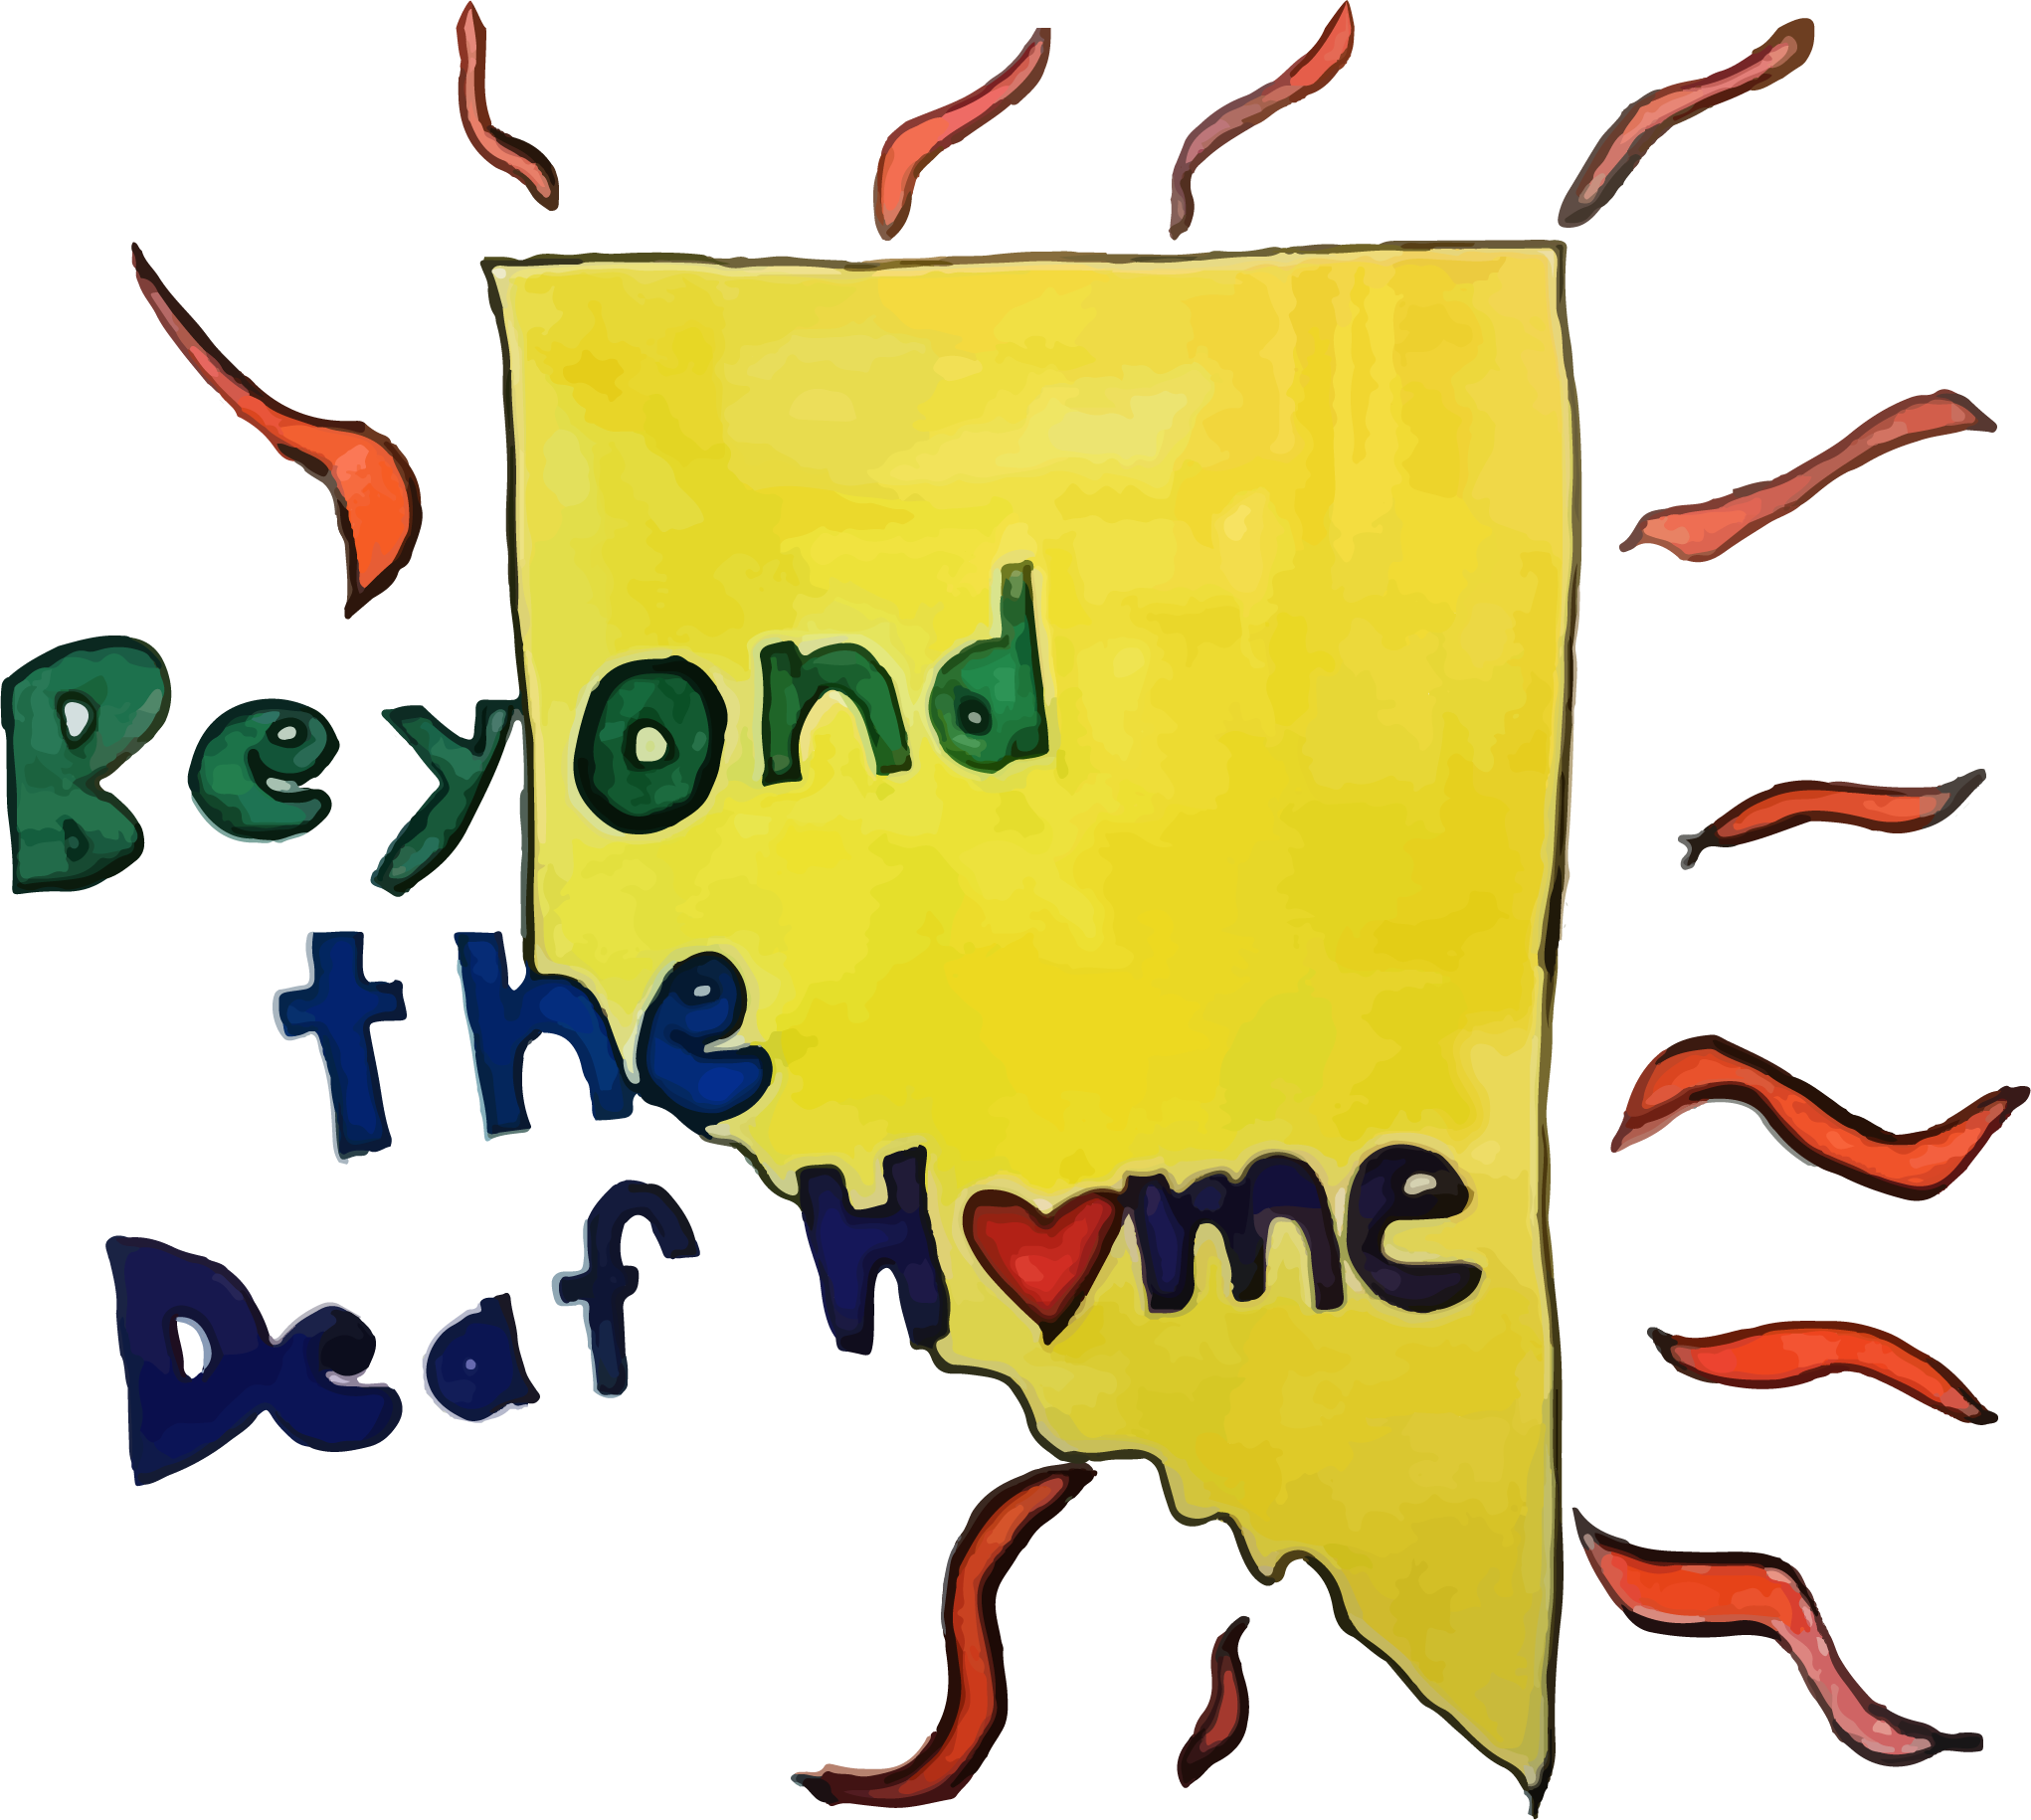 Beyond the Deaf Home logo a yellow nevada shape with red rays and a heart for the O in home. Drawn by previous campers.